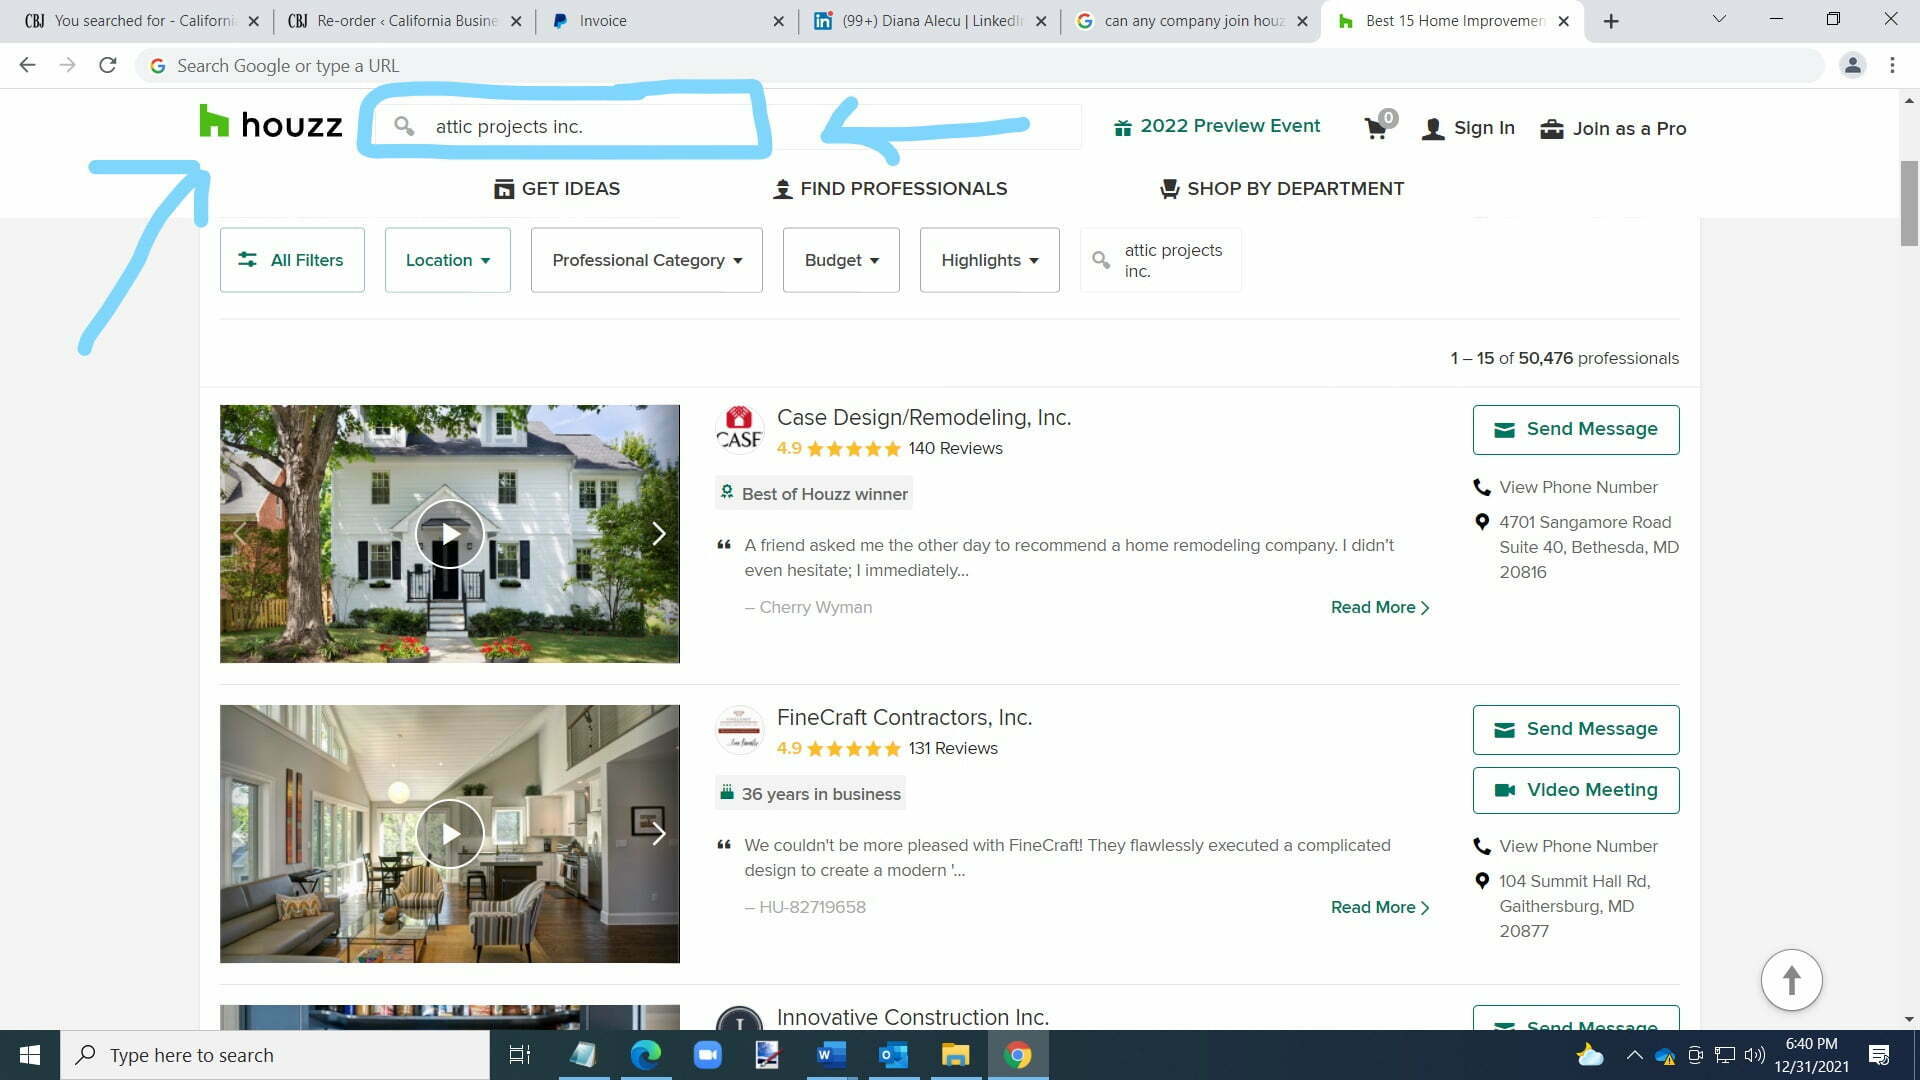 Attic Projects is NOT listed on Houzz's website, as Attic Projects claims it is in its advertising literature, which is a Federal misdemeanor. As the screen shot demonstrates, when you search for Attic Projects in the search bar, its profile does not appear. When other companies are searched, their Houzz profiles appear instantly at the top of the list. 